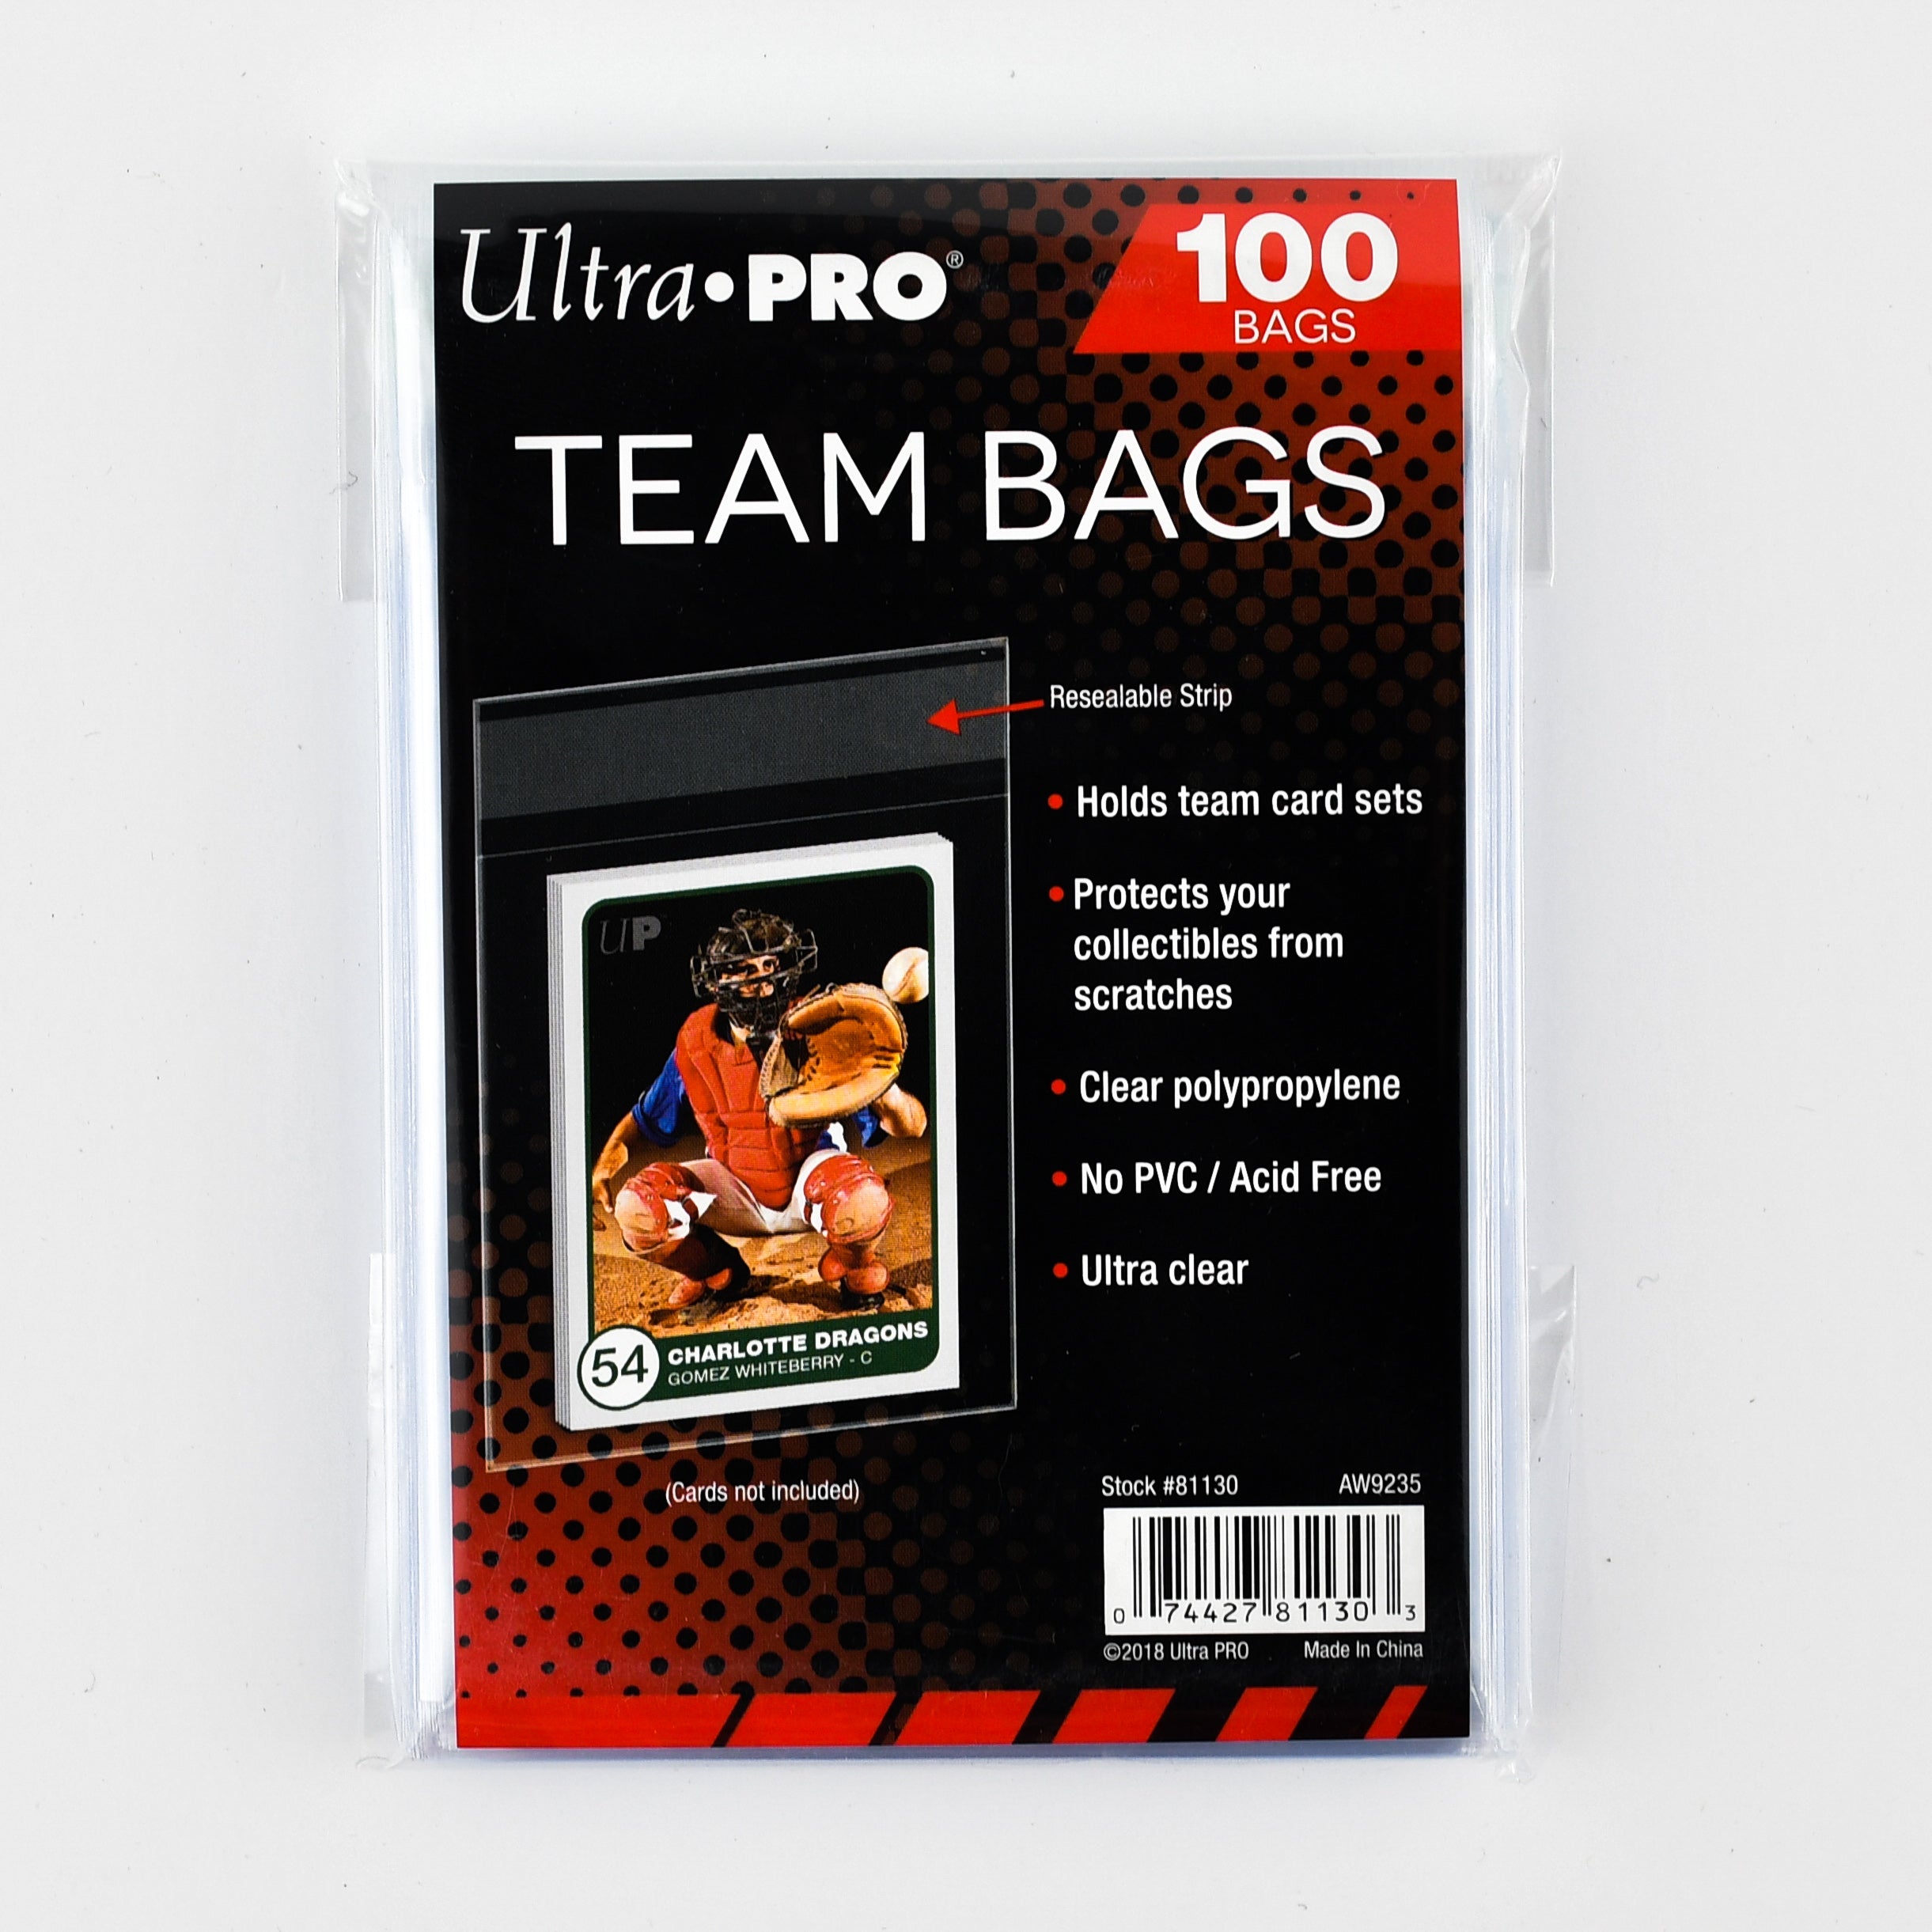 Ultra PRO Resealable Team Bags - 100 Count